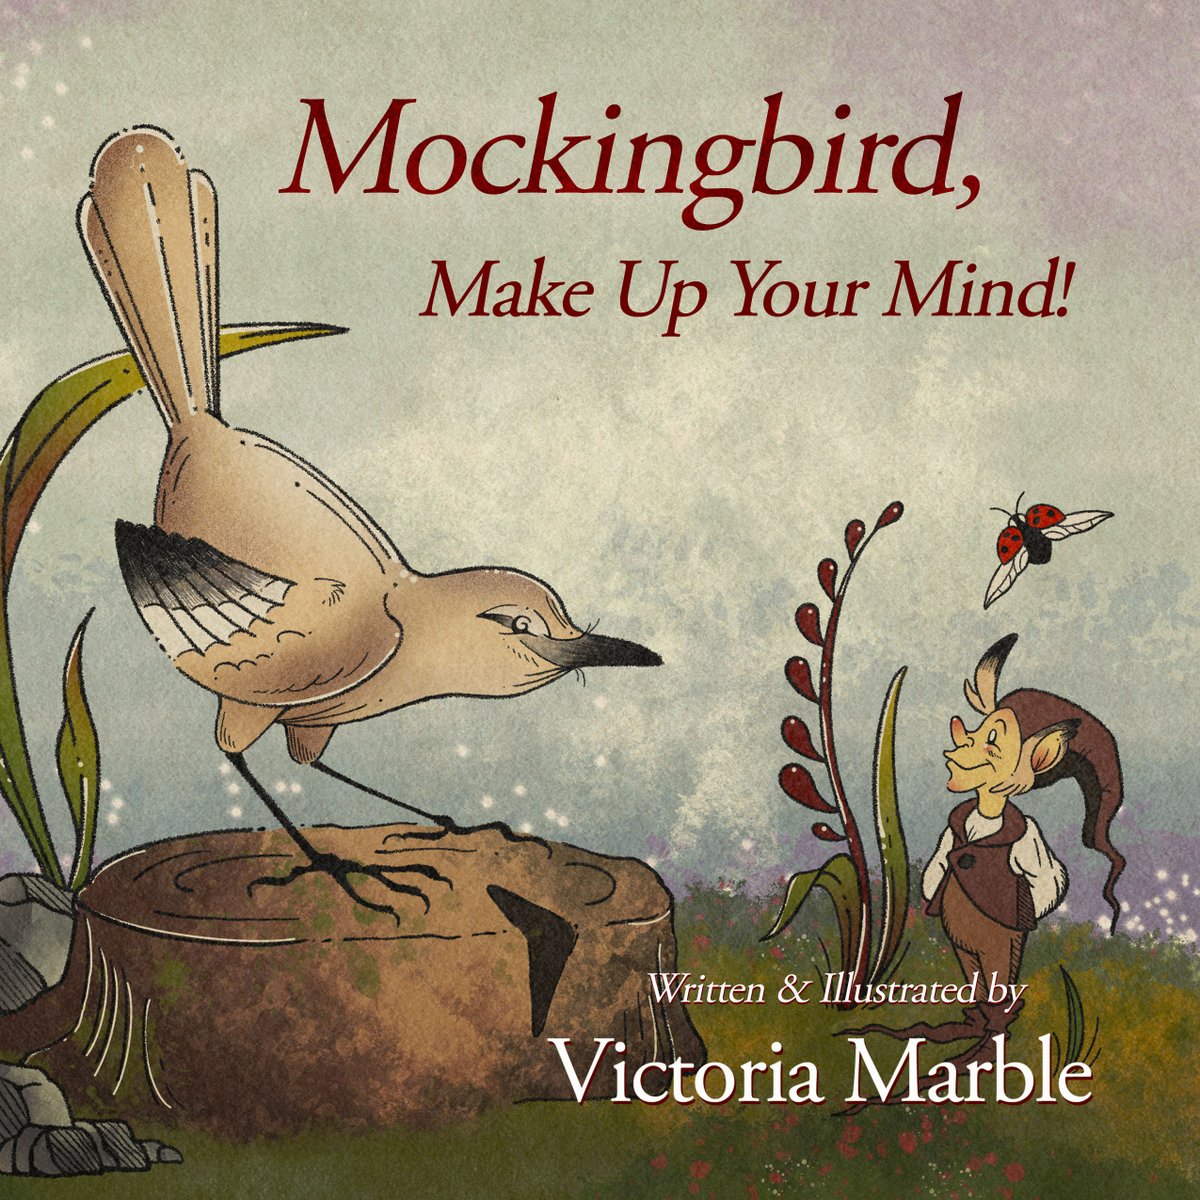 Young Dragons Press Cover Reveal: Mockingbird, Make Up Your Mind written and illustrated by Victoria Marble. Have you ever wondered where a mockingbird learns its many sounds? Follow along on this onomatopoeic rhyming adventure and help the mockingbird choose a favorite song.